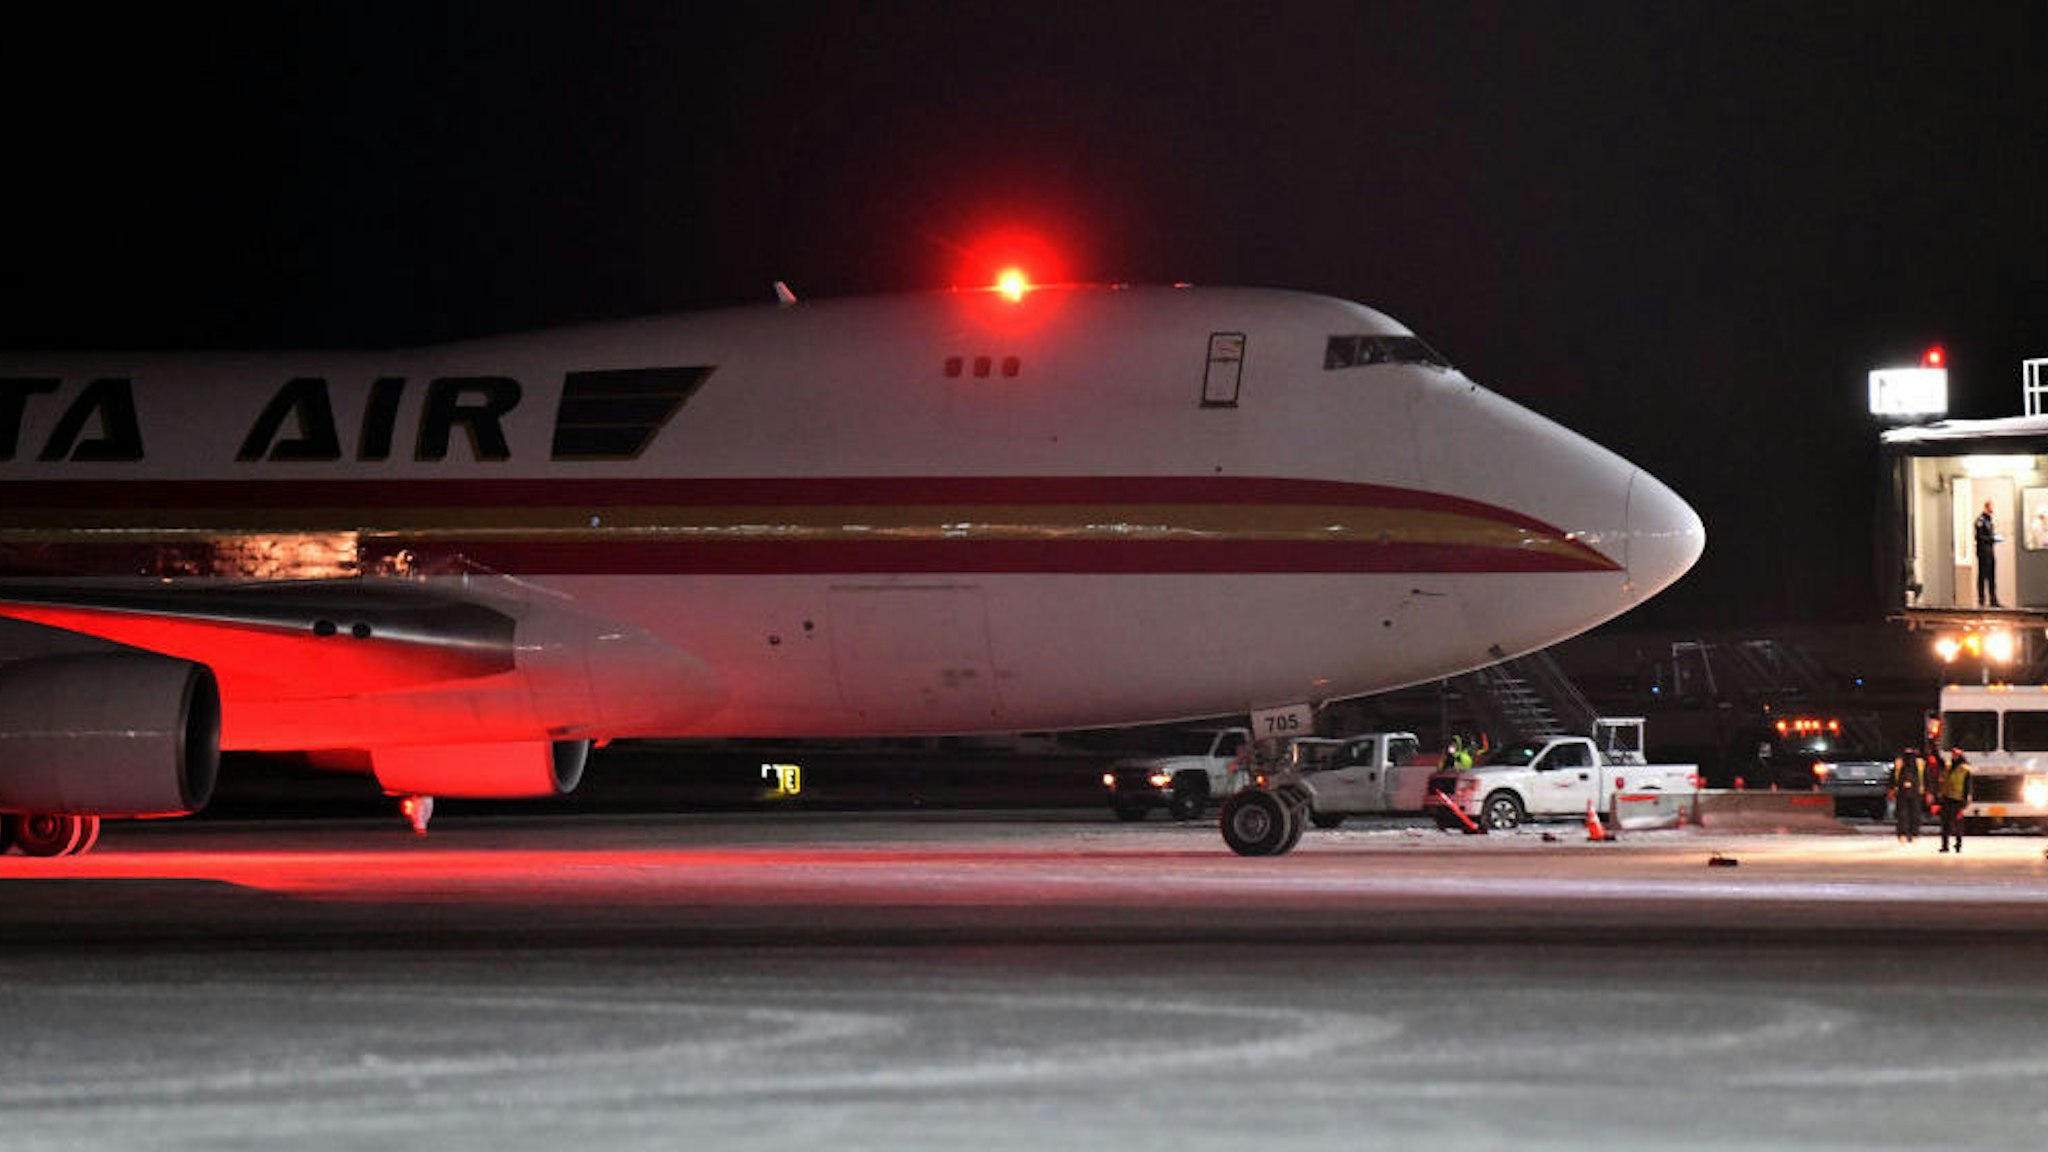 A Boeing 747-4B5(F), on a charter flight from Wuhan, China, arrives at Ted Stevens Anchorage International Airport on January 28, 2020 in Anchorage, Alaska. The U.S. government chartered the plane to evacuate U.S. citizens and diplomats from the U.S. consulate in Wuhan, China where the coronavirus outbreak began. (Photo by Lance King/Getty Images)